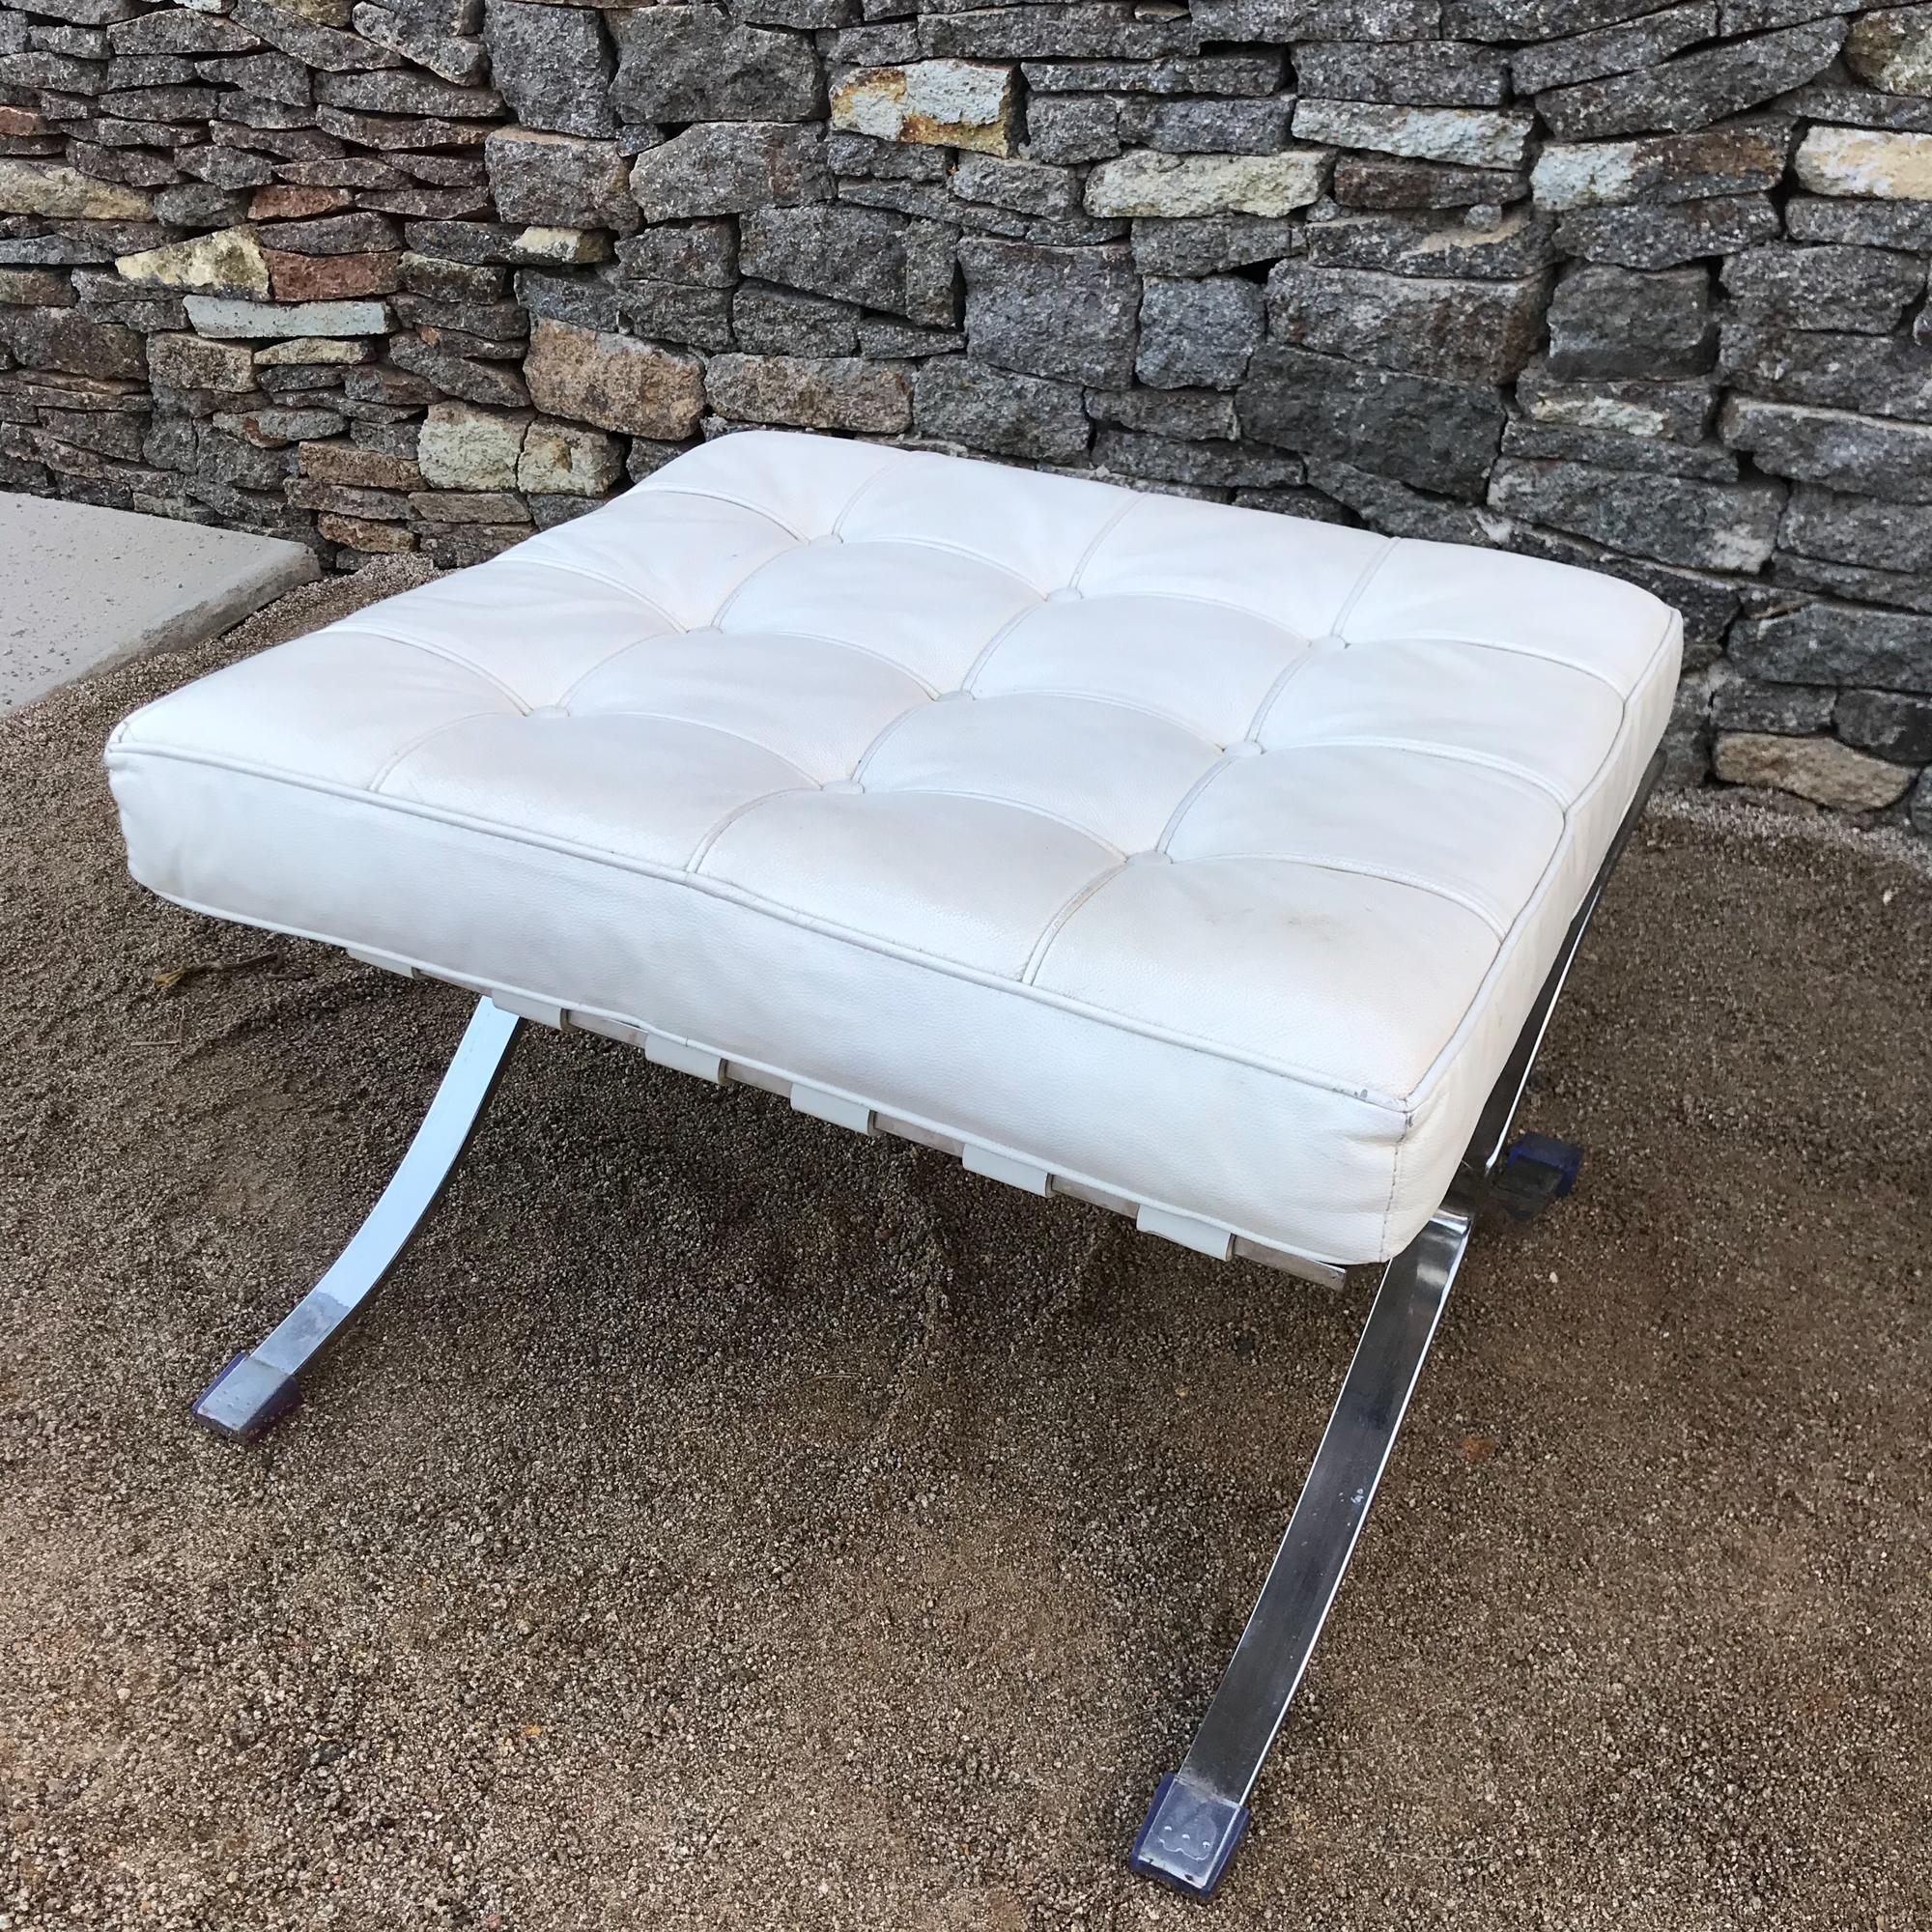 1980s Barcelona ottoman stool in white leather and chrome designed by Ludwig Mies van der Rohe.
Unmarked
16.5H x 21.5 D x 23.5 W
Original preowned vintage unrestored condition. 
Please refer to our images. 
Delivery to LA PS OC
Inquire with dealer